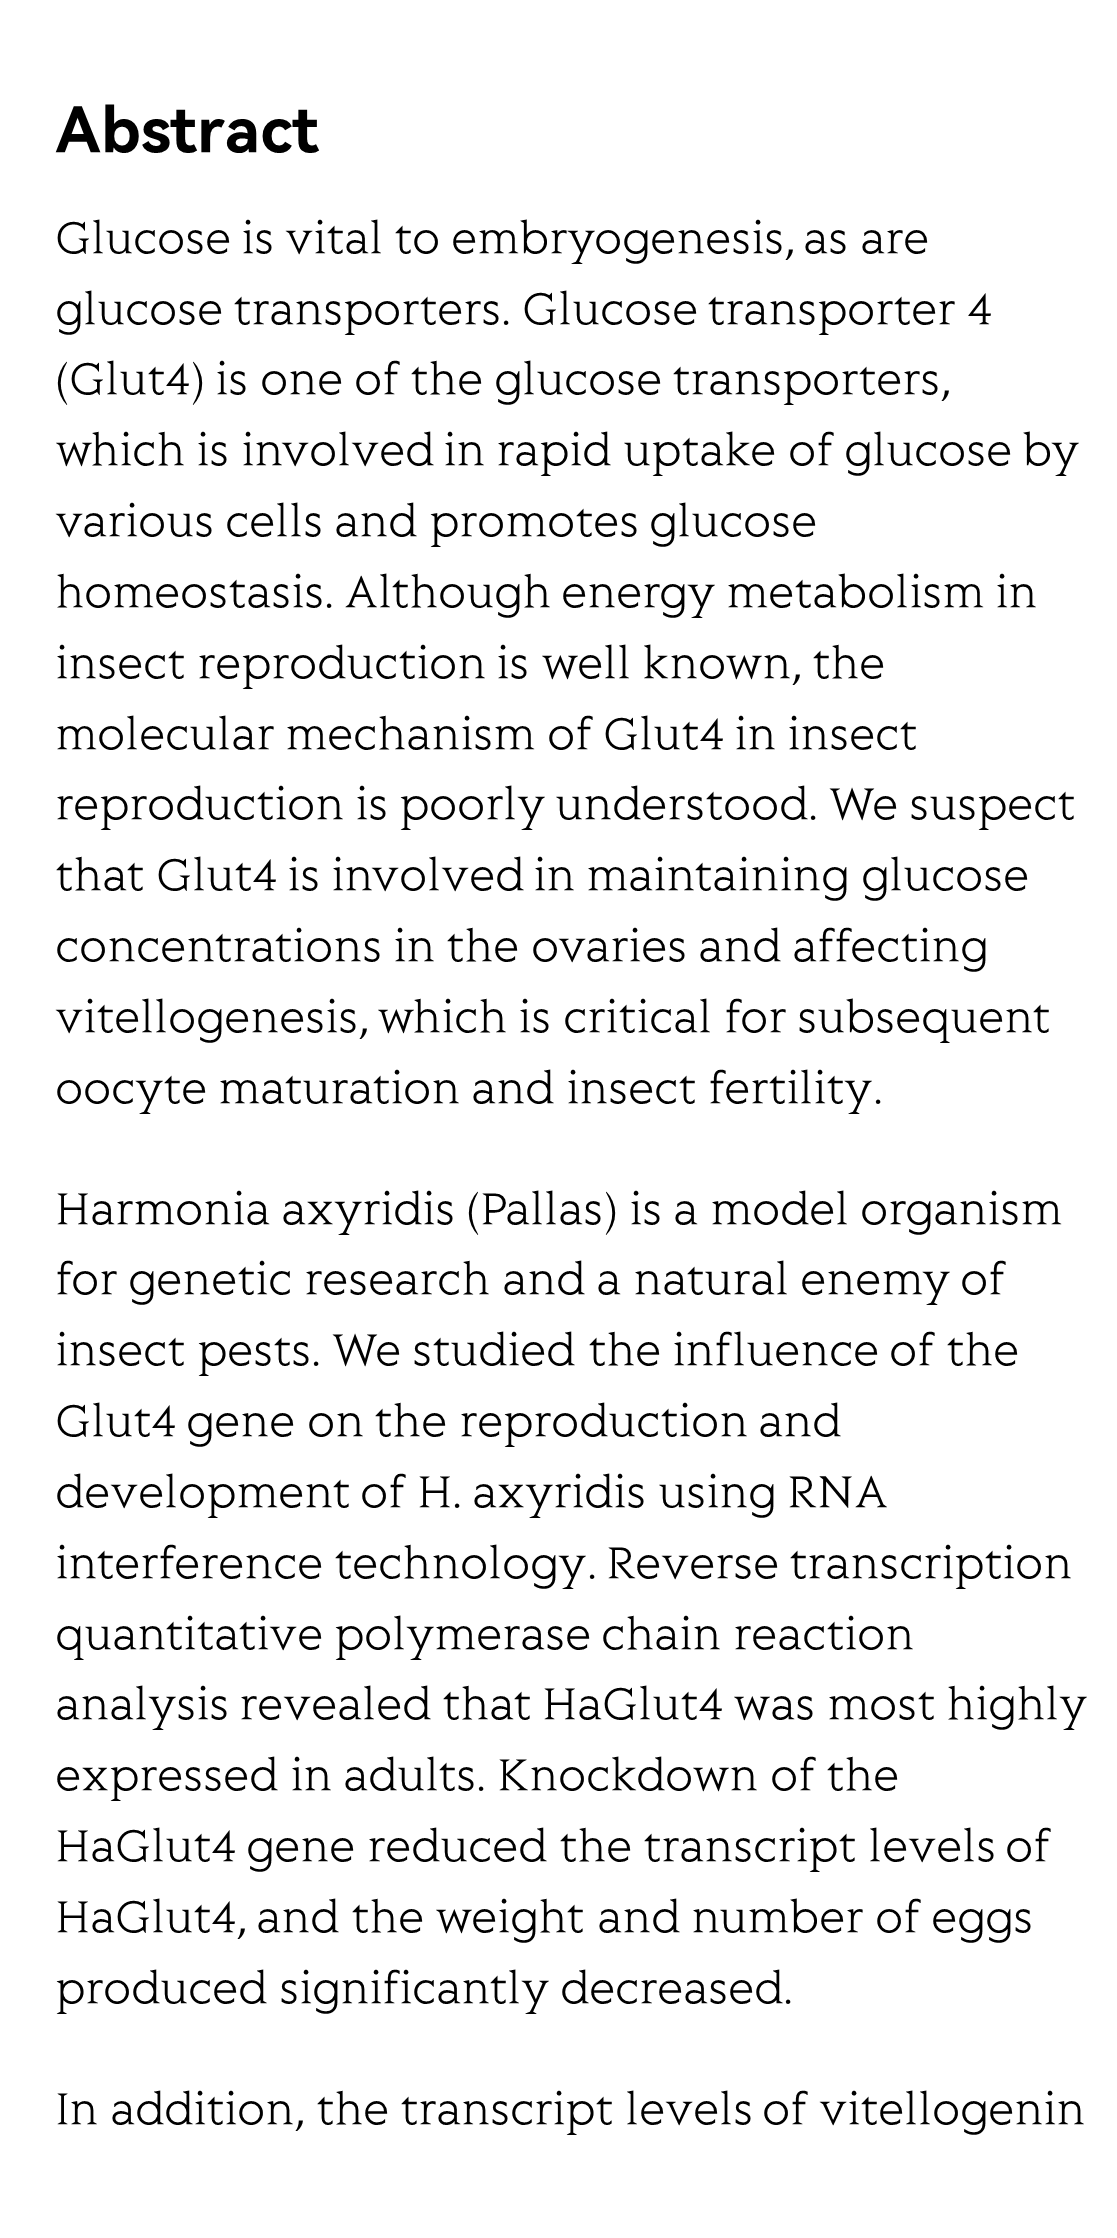 Involvement of glucose transporter 4 in ovarian development and reproductive maturation of Harmonia axyridis (Coleoptera: Coccinellidae)_2